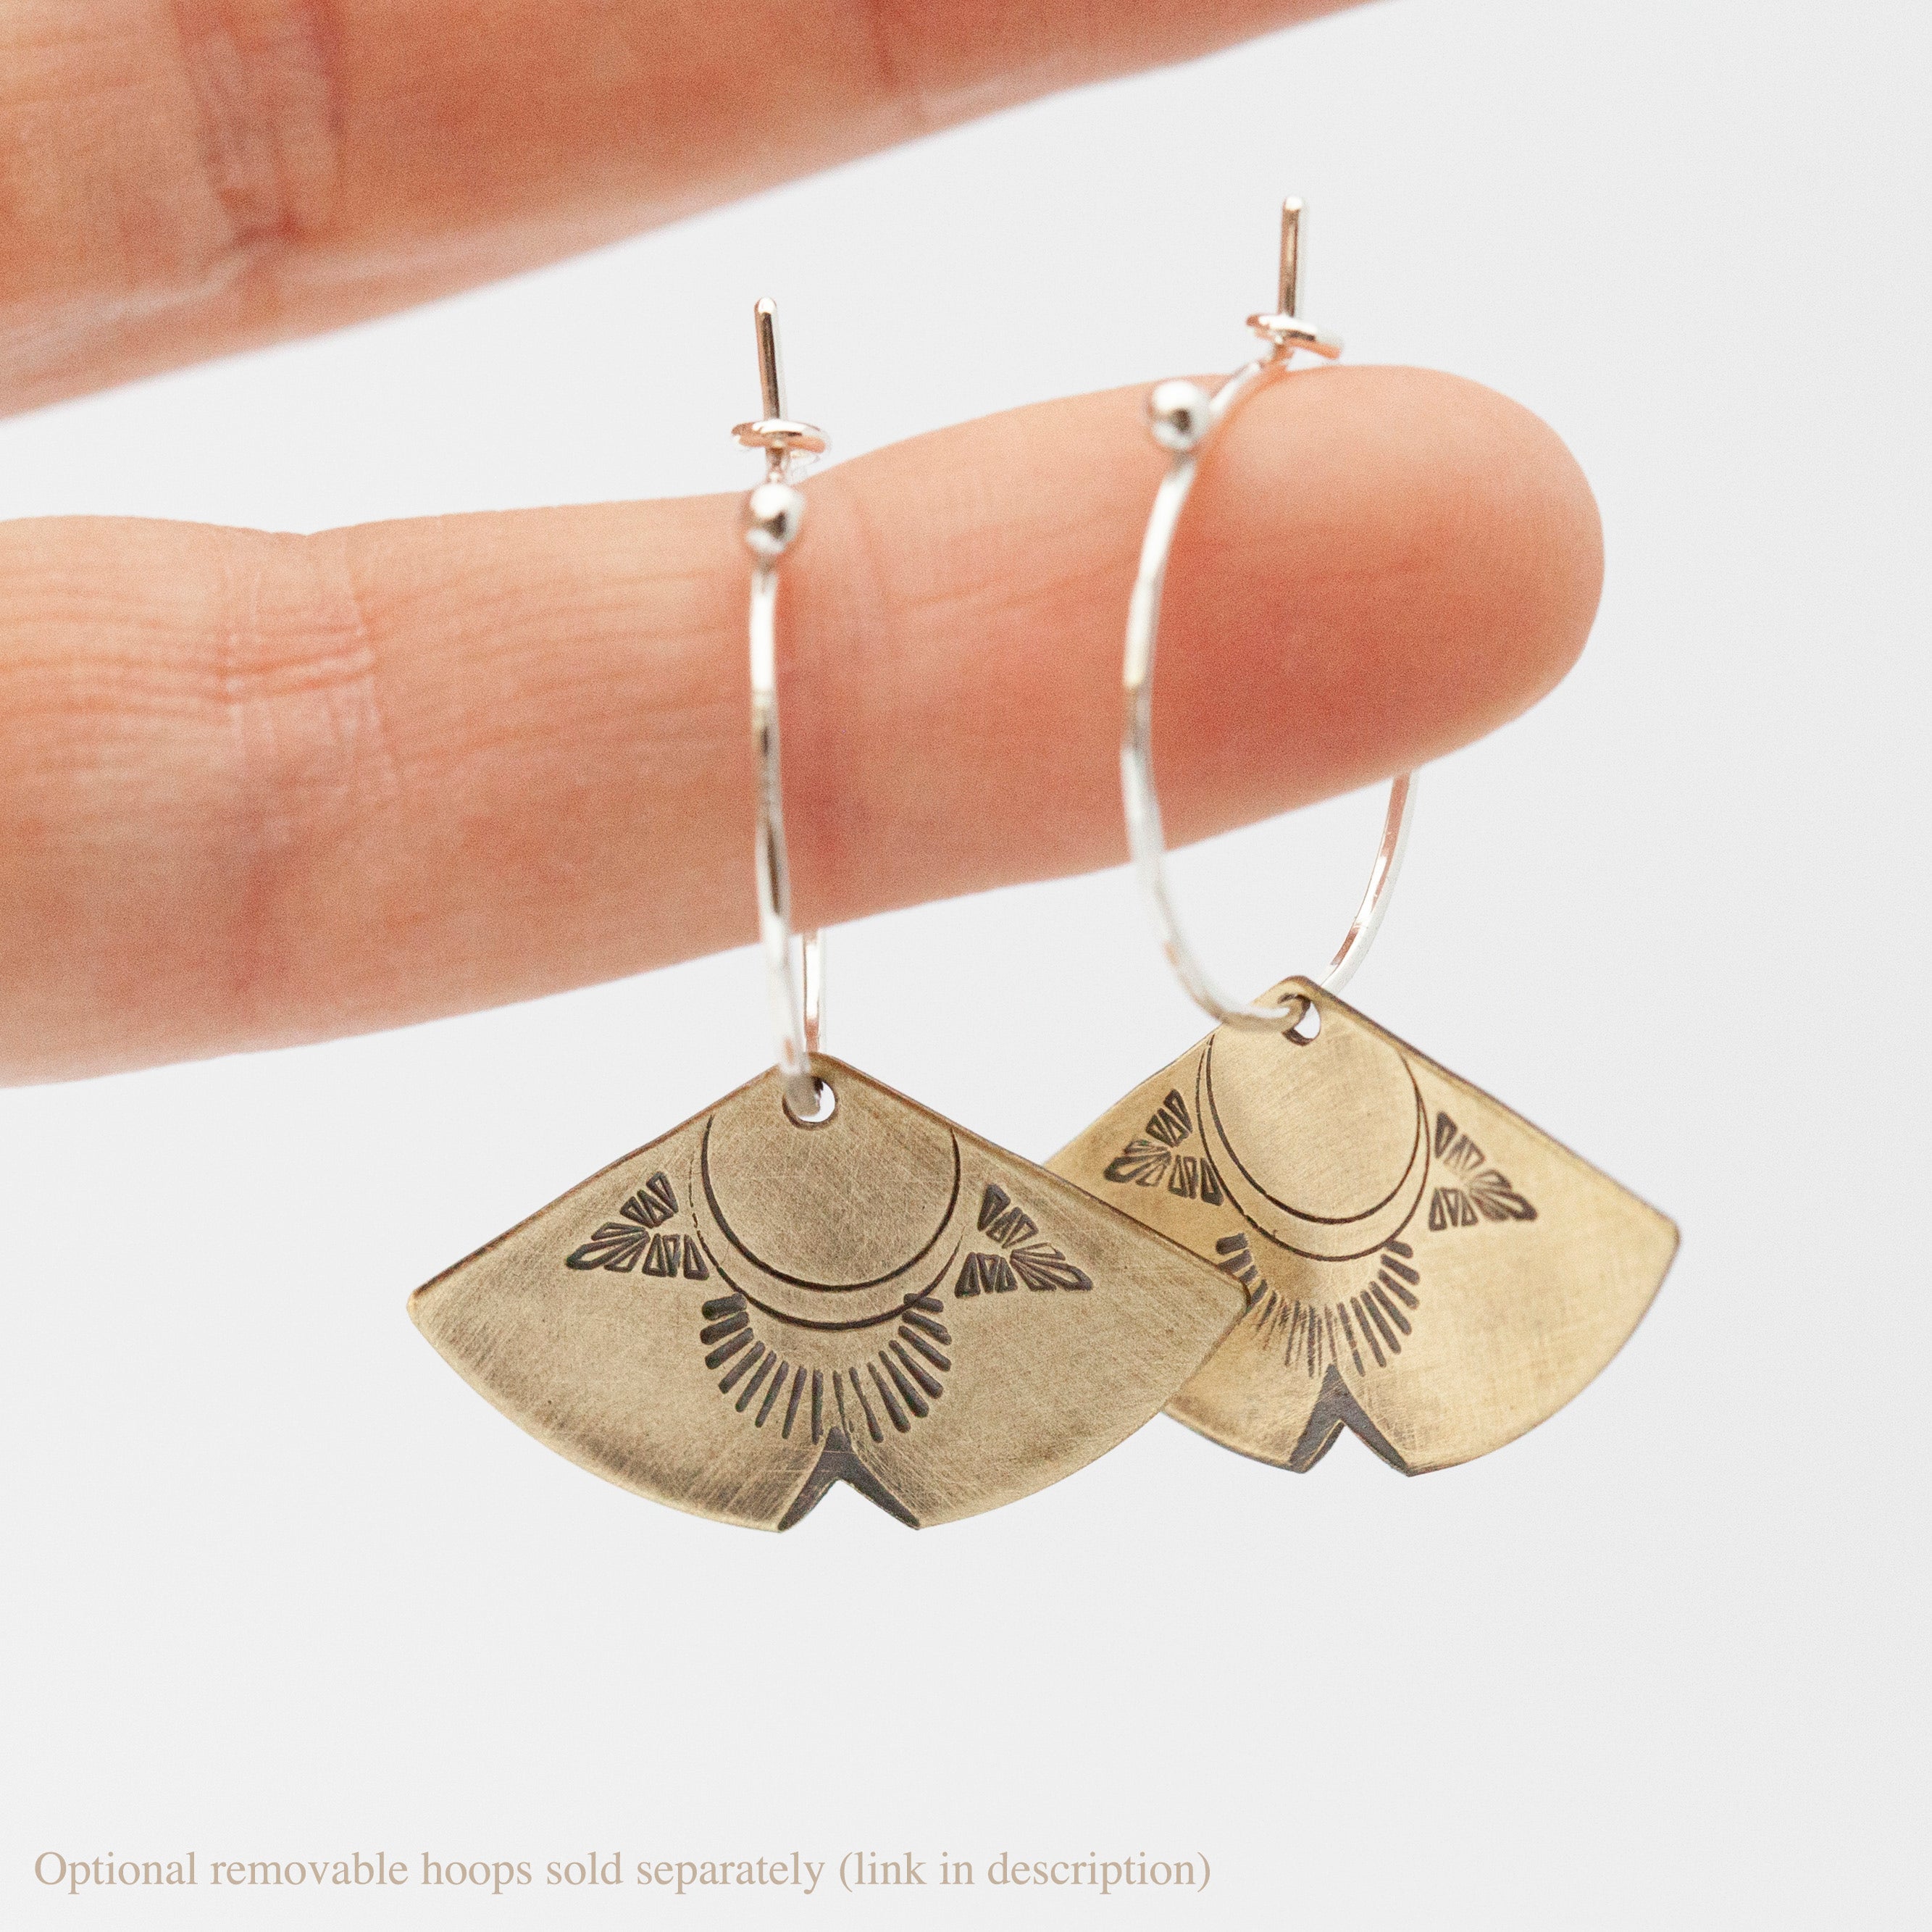 Aela earrings : Brass ear jackets with ethnic patterns (made to order)